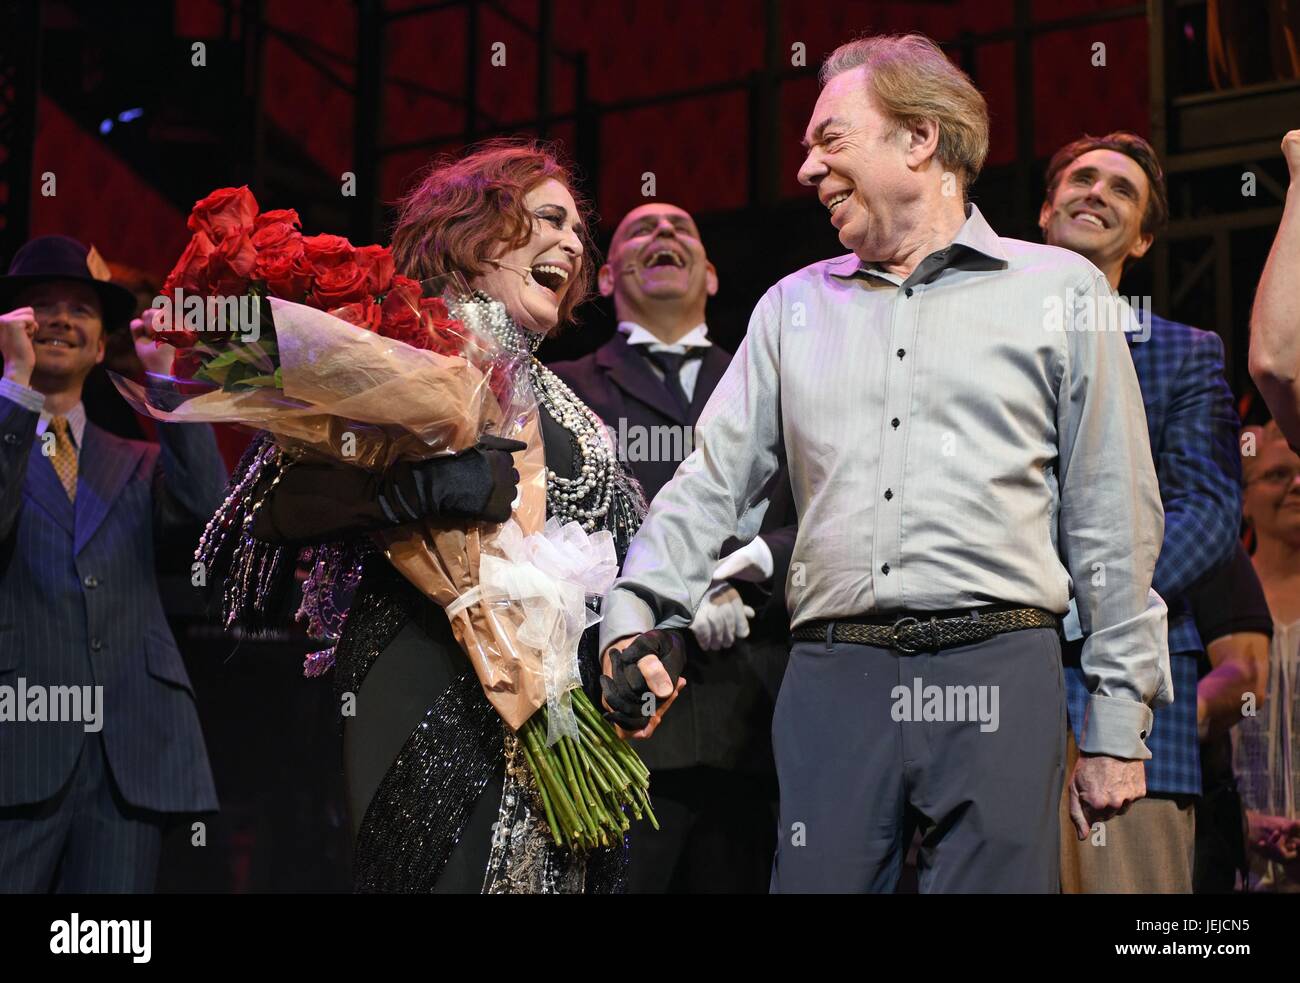 New York, NY, USA. 25th June, 2017. Glenn Close, Andrew Lloyd Webber at a public appearance for Glenn Close Takes Final Bow in SUNSET BOULEVARD, Palace Theatre, New York, NY June 25, 2017. Credit: Derek Storm/Everett Collection/Alamy Live News Stock Photo